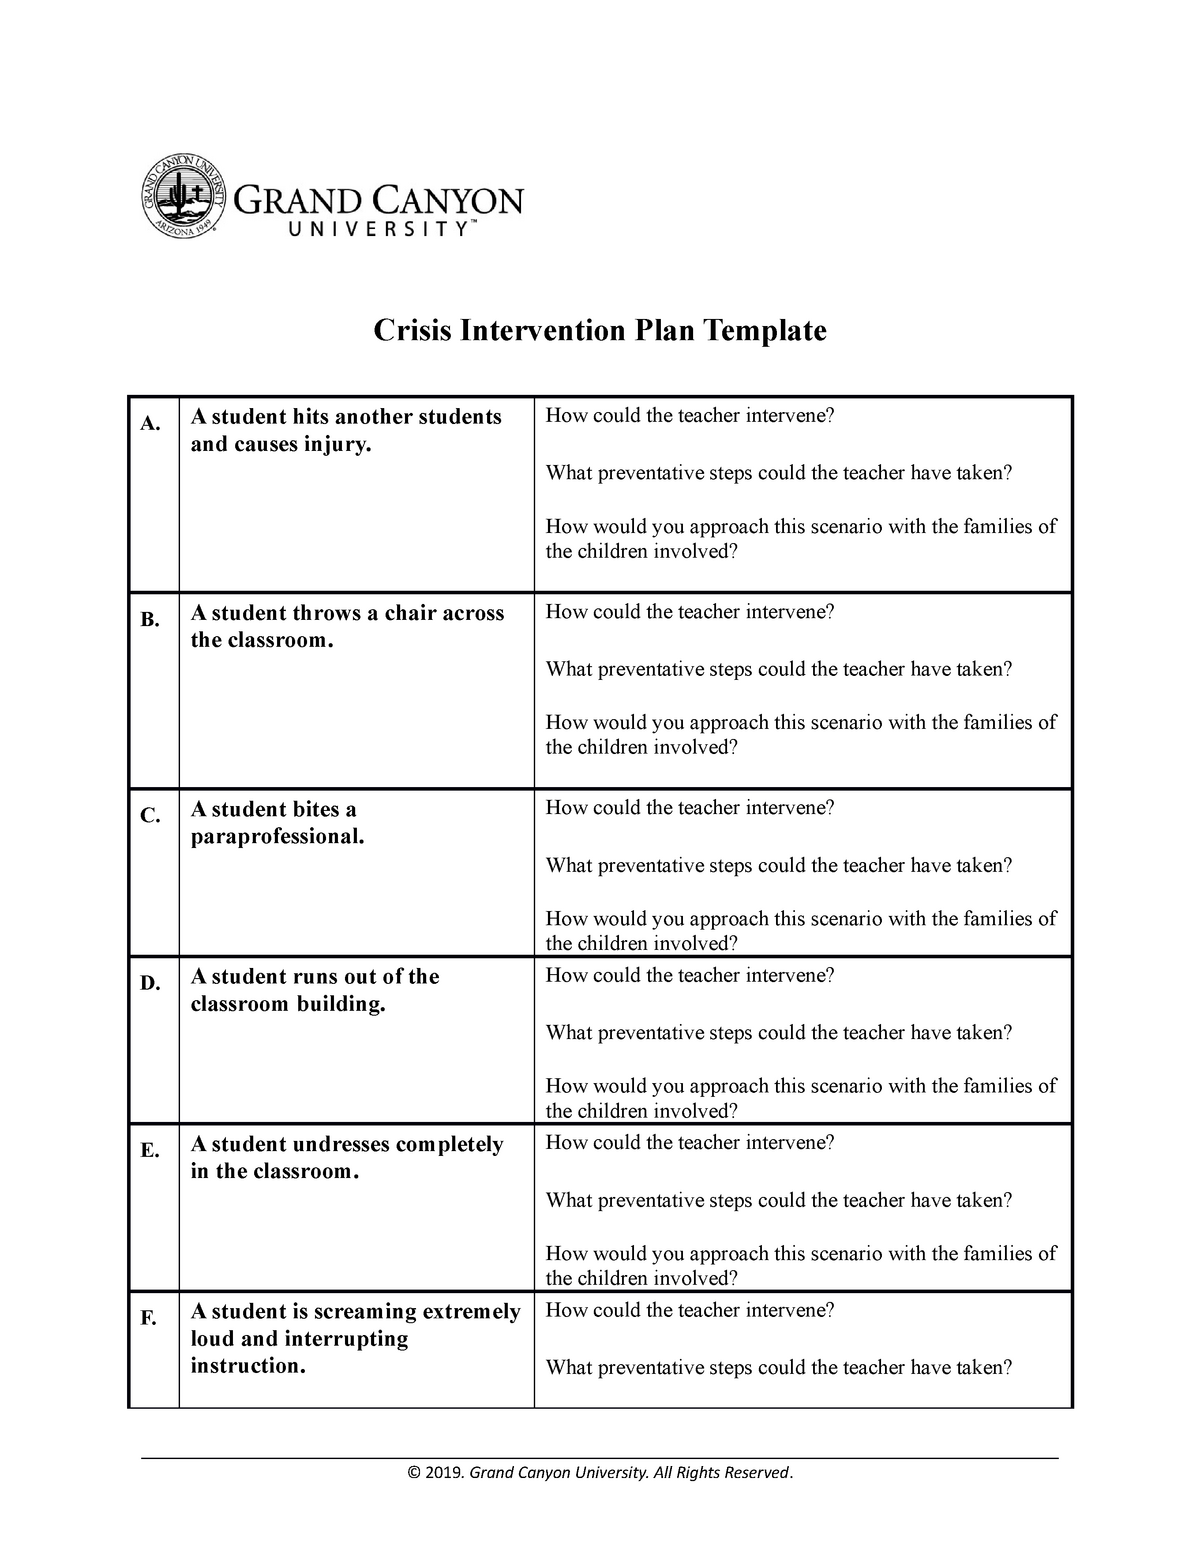 Crisis Prevention and Intervention Plan Template Crisis Intervention